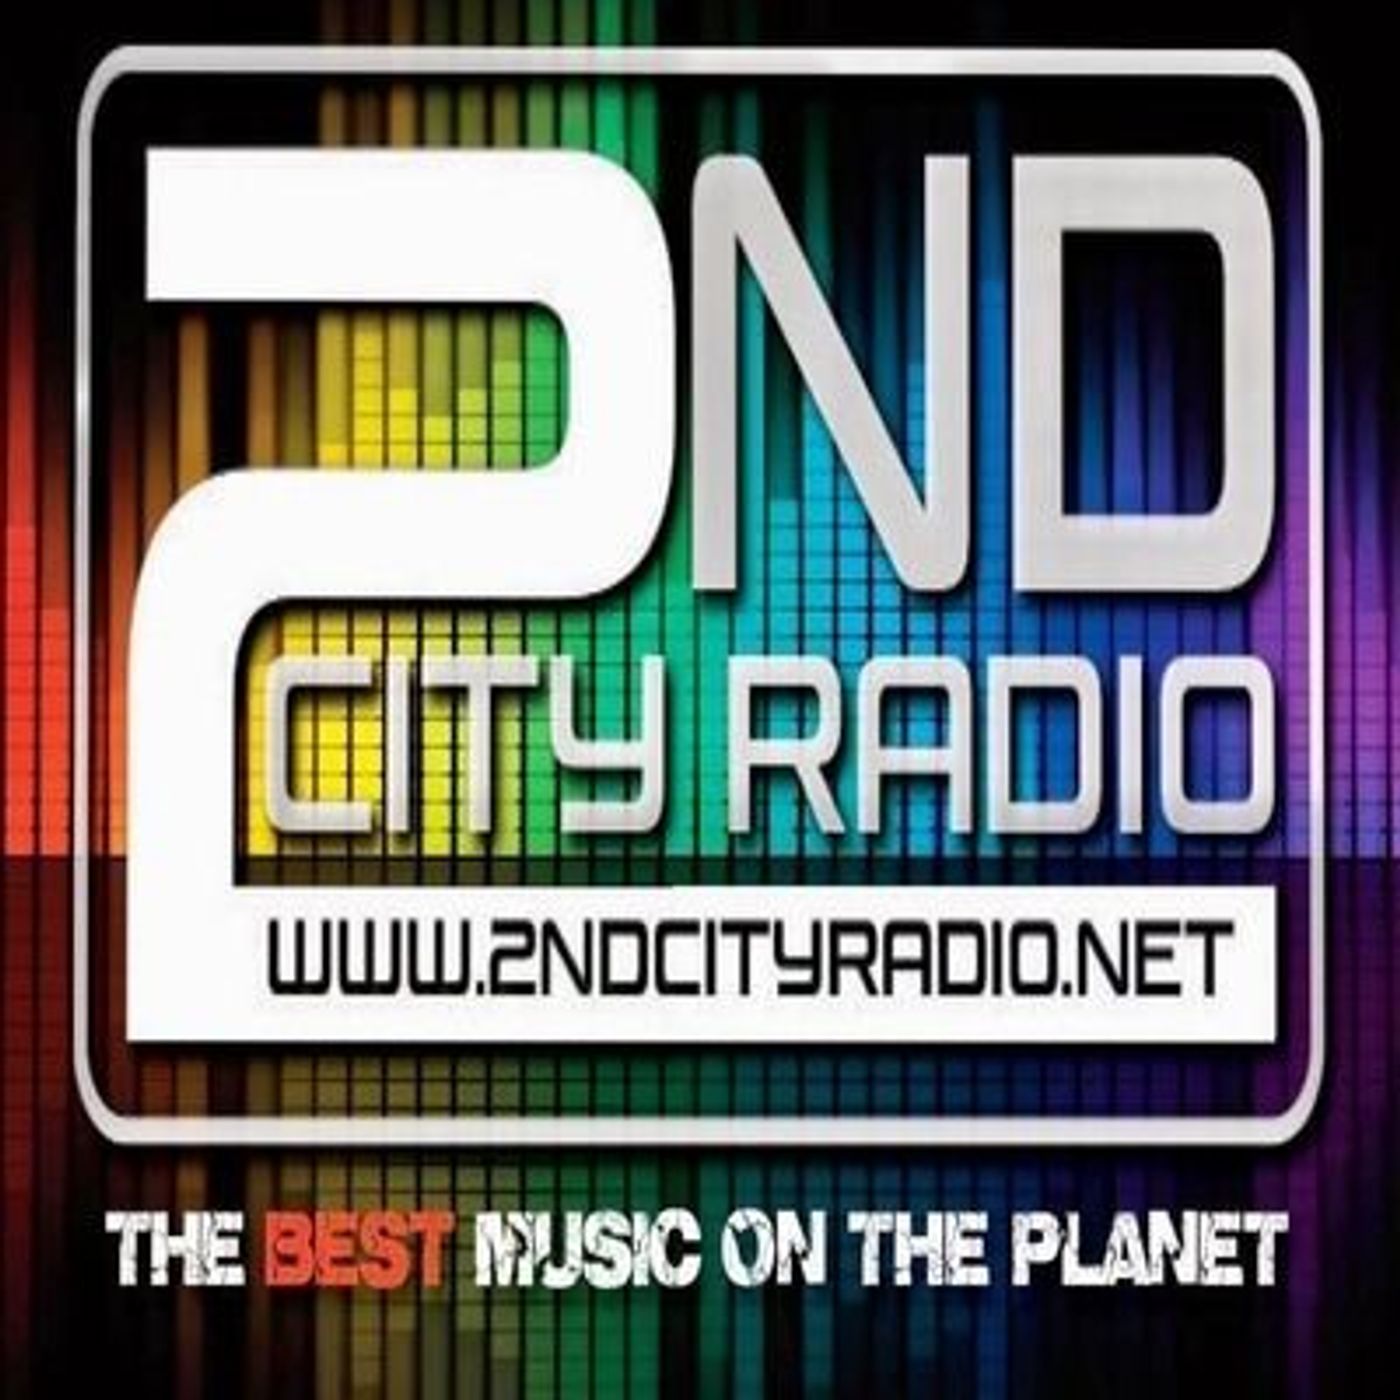 Friday the 21st of Jan 2022 n 2ndcity Radio with Classic Chat